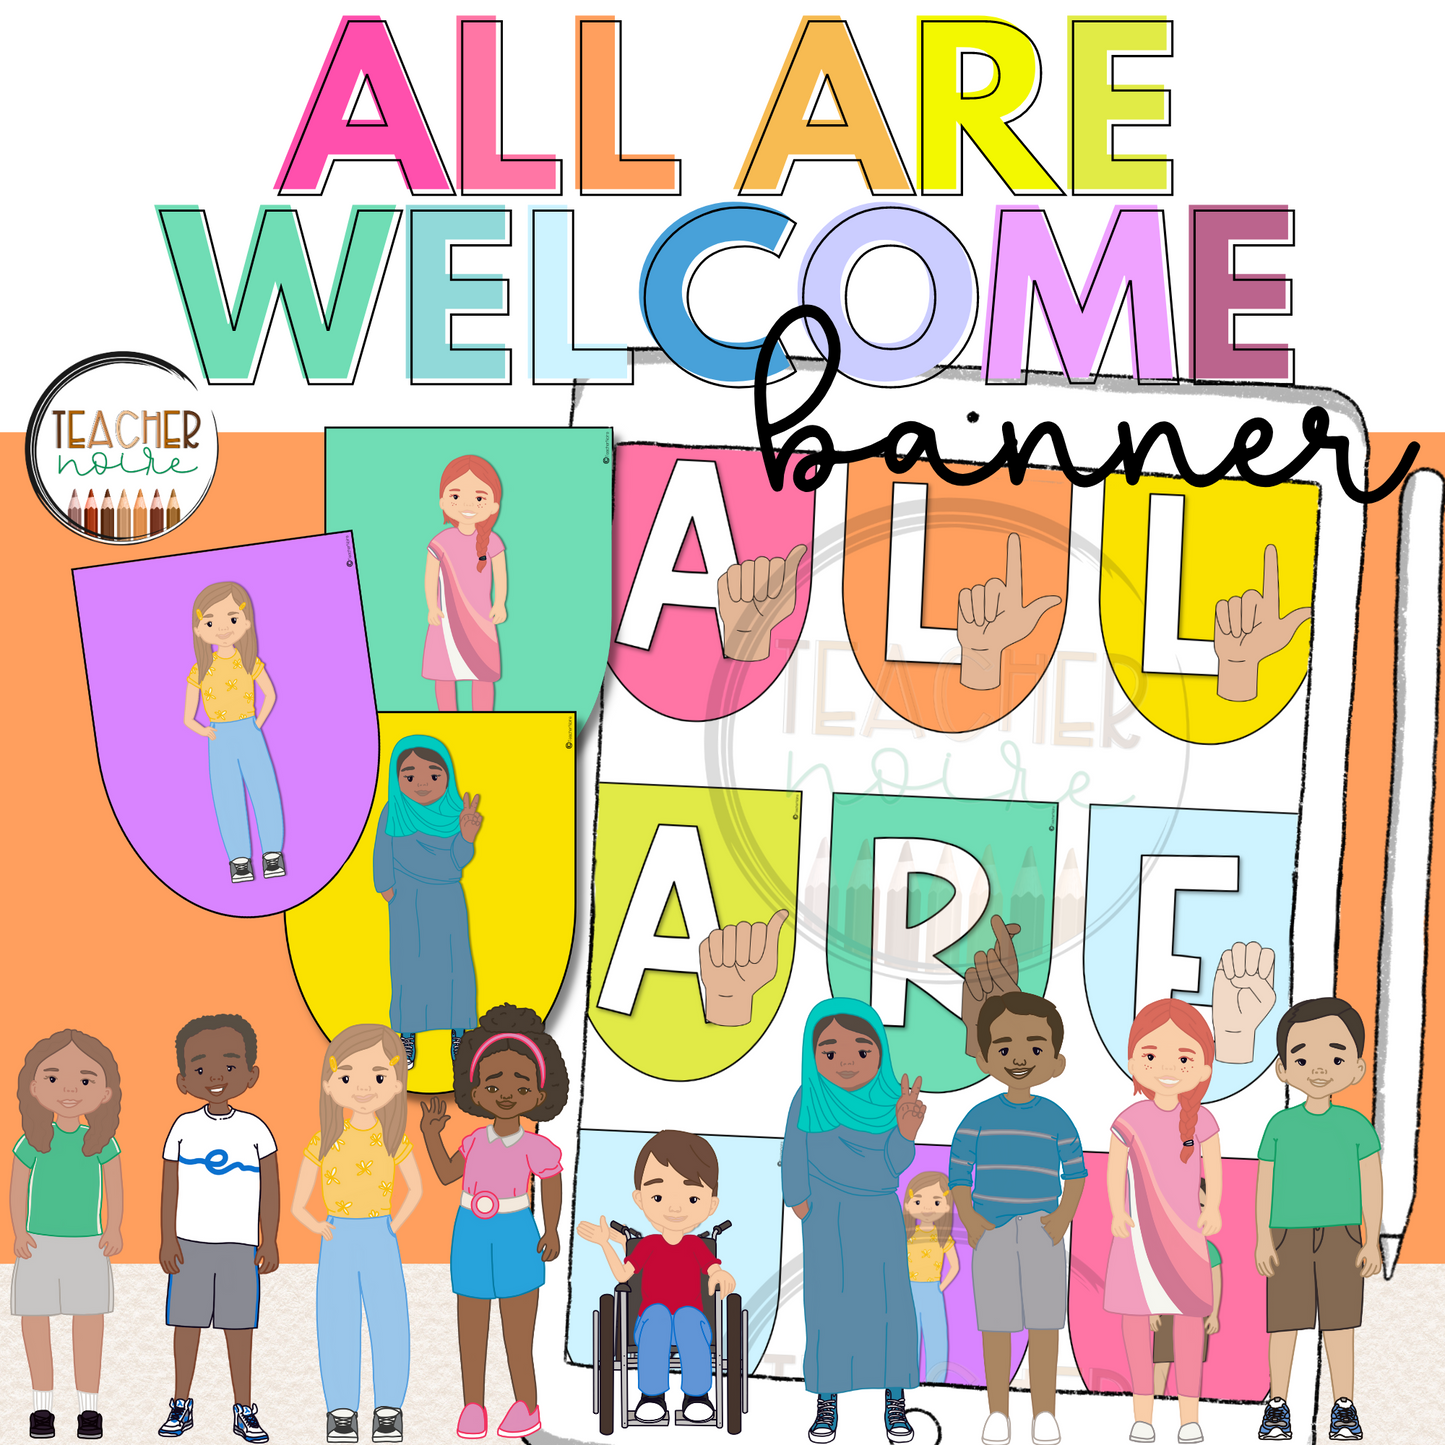 All Are Welcome Here Banner